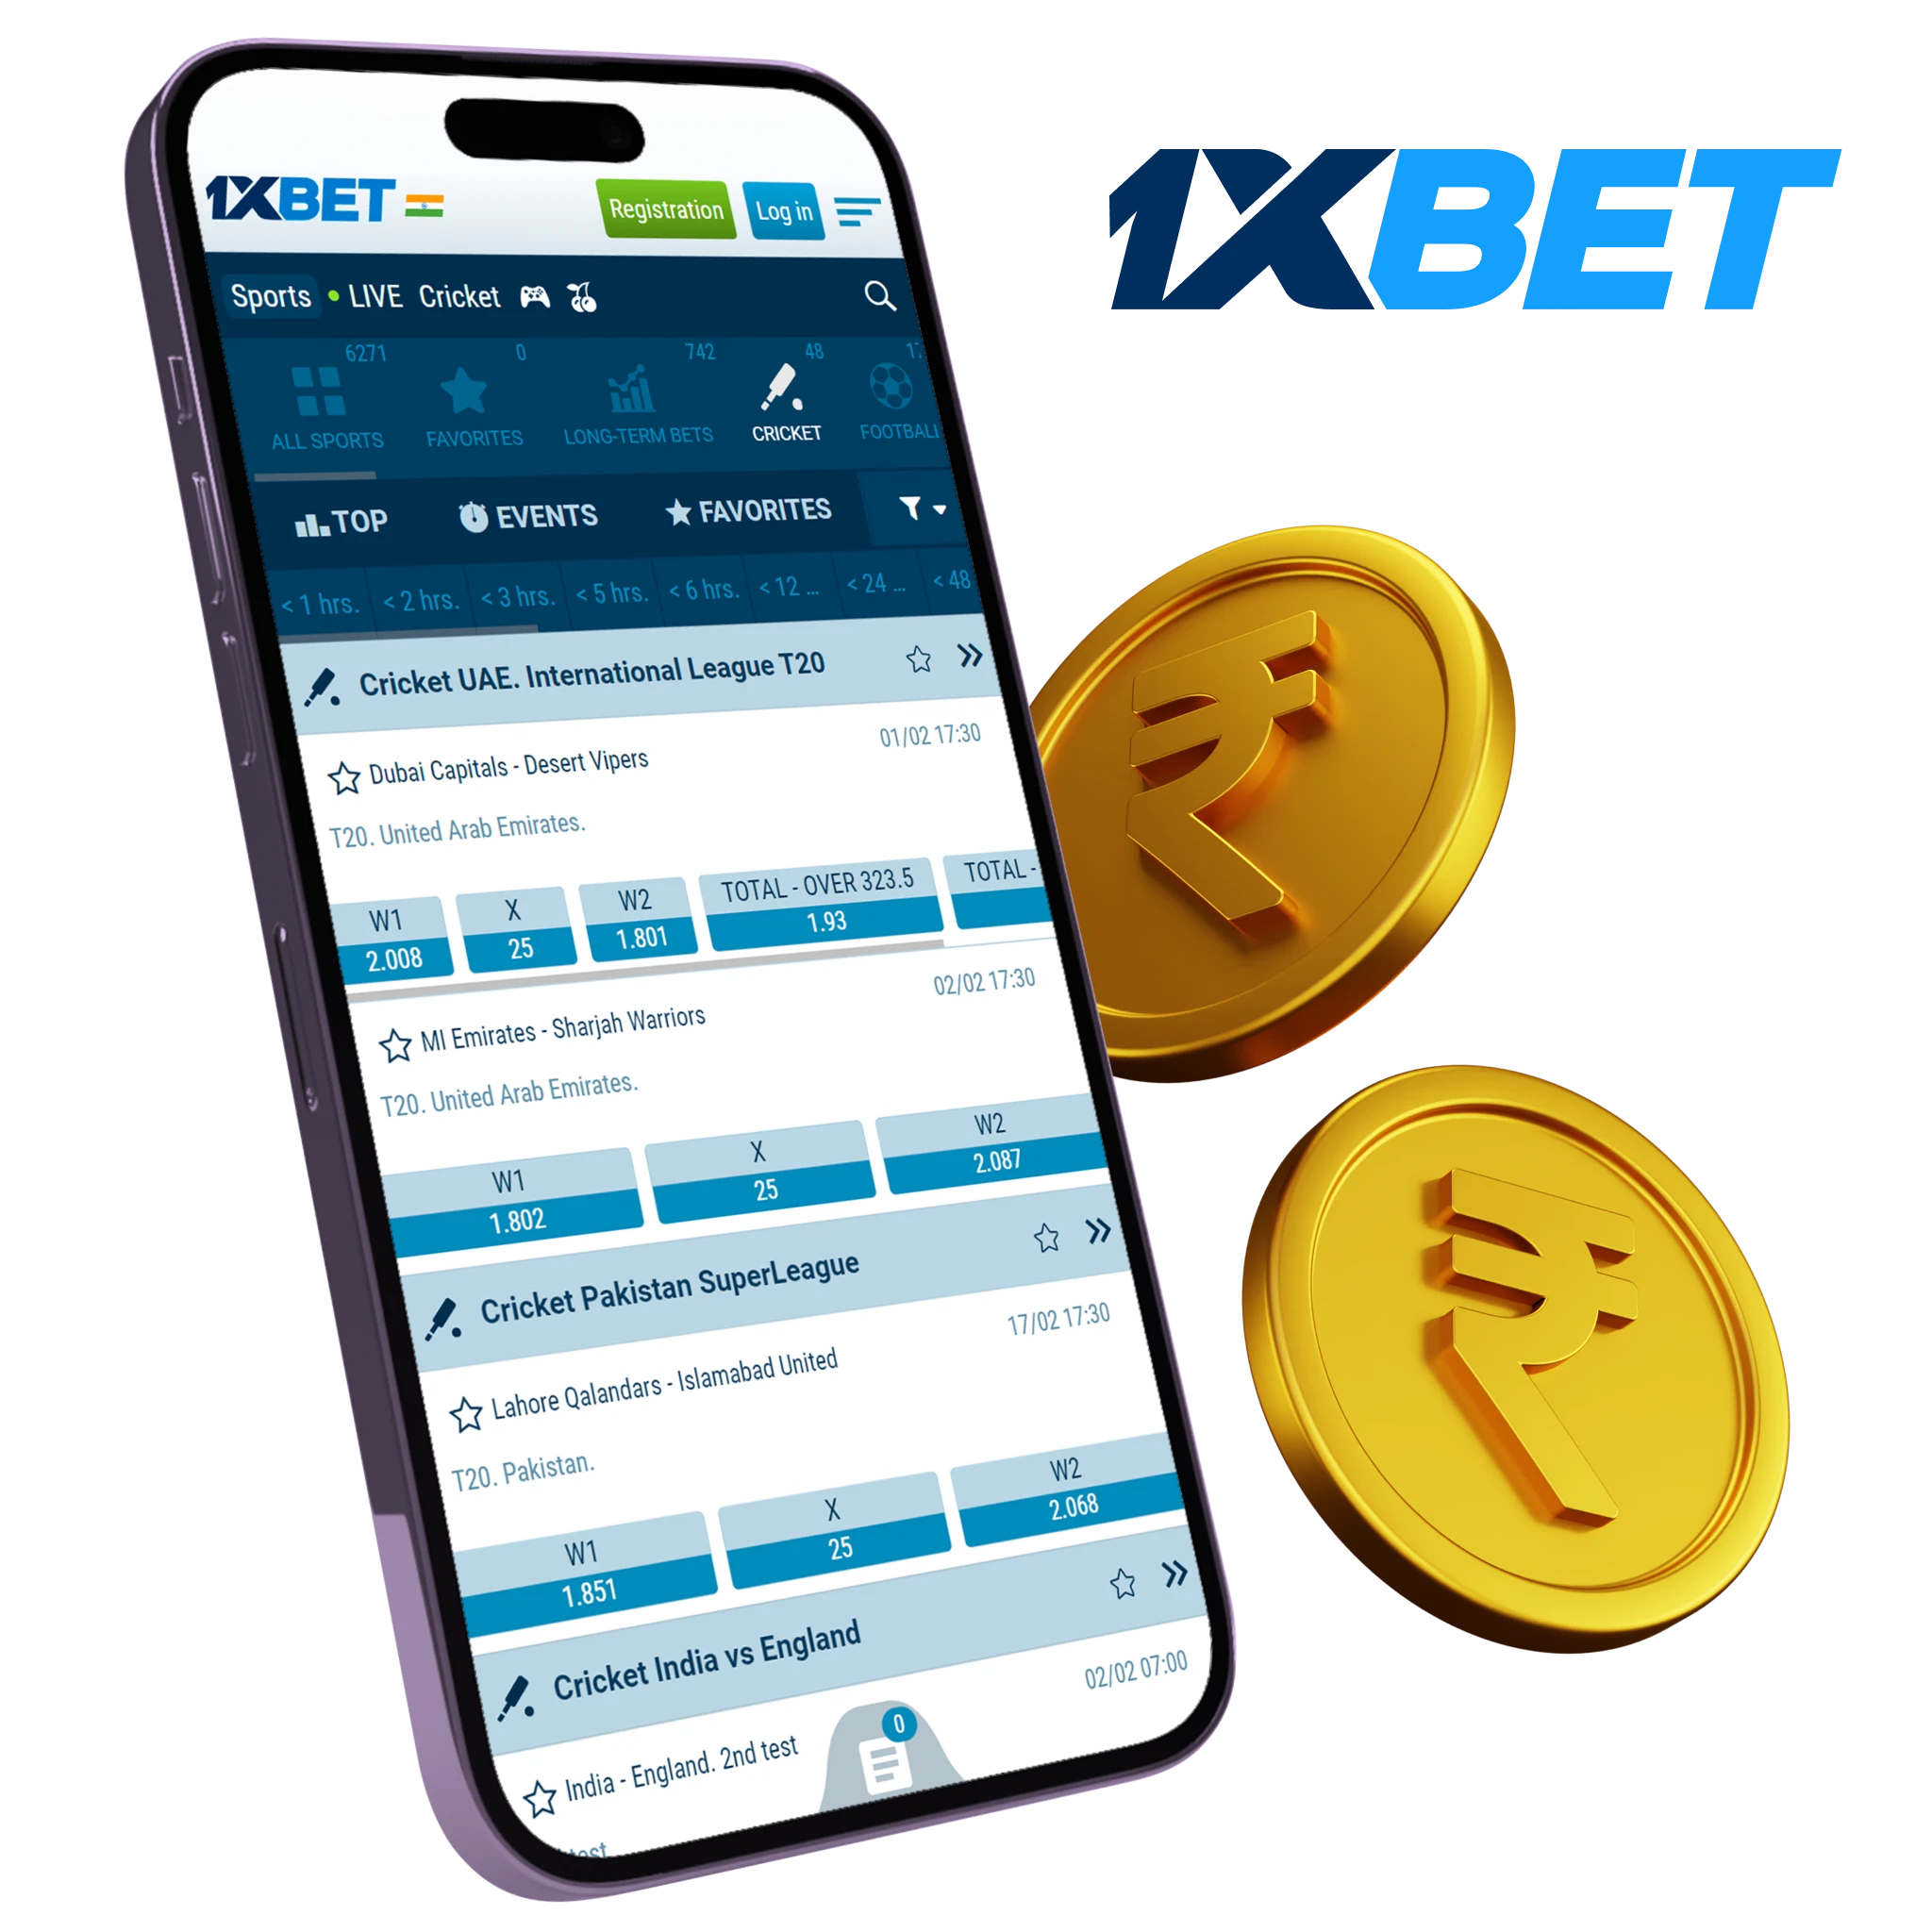 1xbet app offers an exceptional experience in real money cricket betting. 